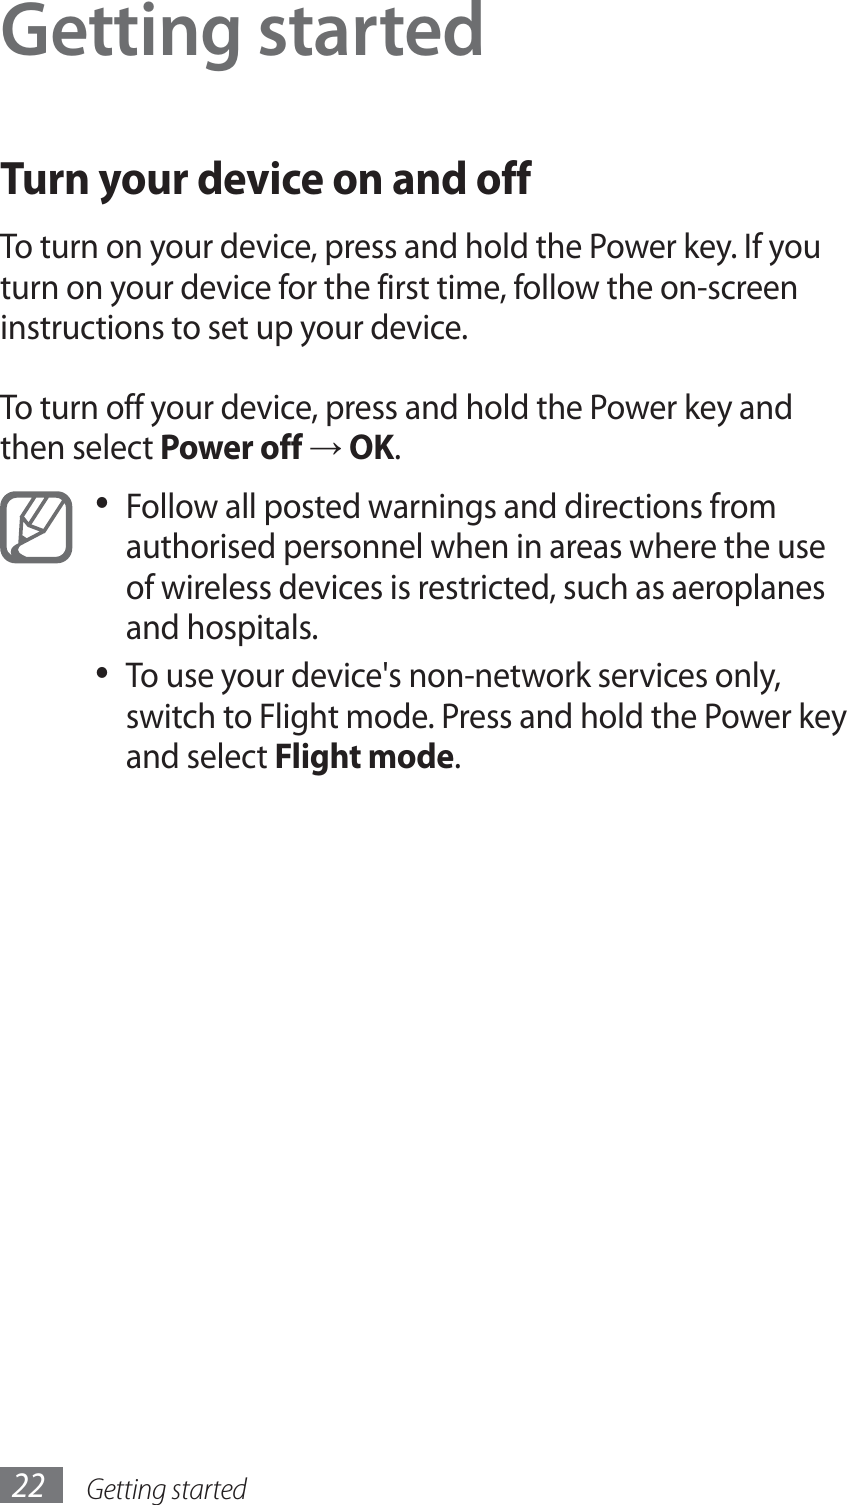 Getting started22Getting startedTurn your device on and offTo turn on your device, press and hold the Power key. If you turn on your device for the first time, follow the on-screen instructions to set up your device.To turn off your device, press and hold the Power key and then select Power off → OK.Follow all posted warnings and directions from • authorised personnel when in areas where the use of wireless devices is restricted, such as aeroplanes and hospitals.To use your device&apos;s non-network services only, • switch to Flight mode. Press and hold the Power key and select Flight mode. 